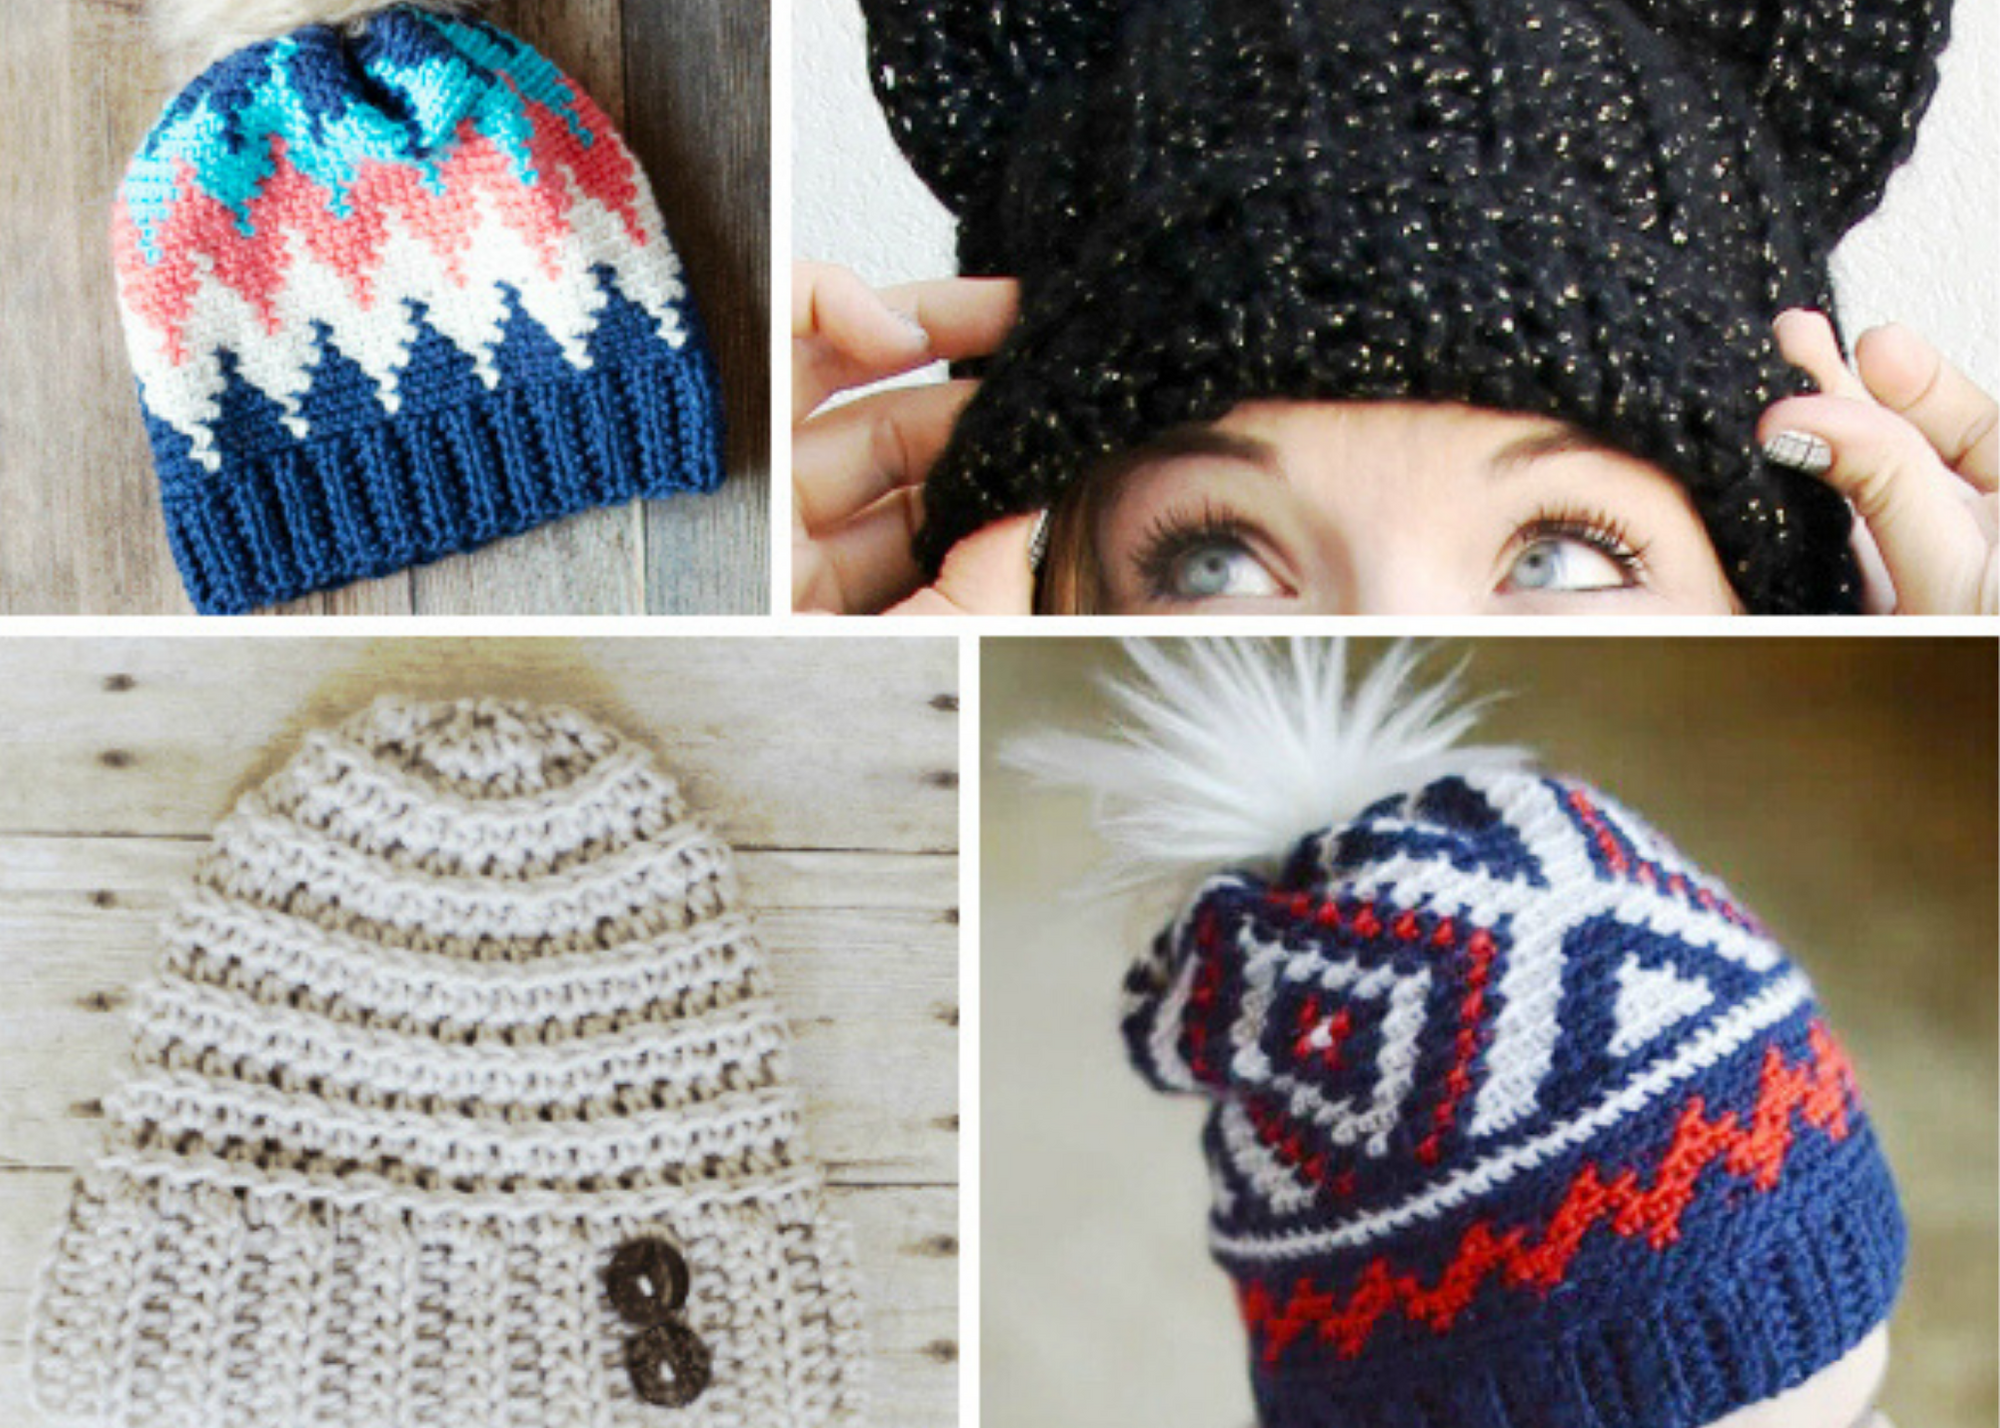 DIY crochet hats in chevron print and with buttons.